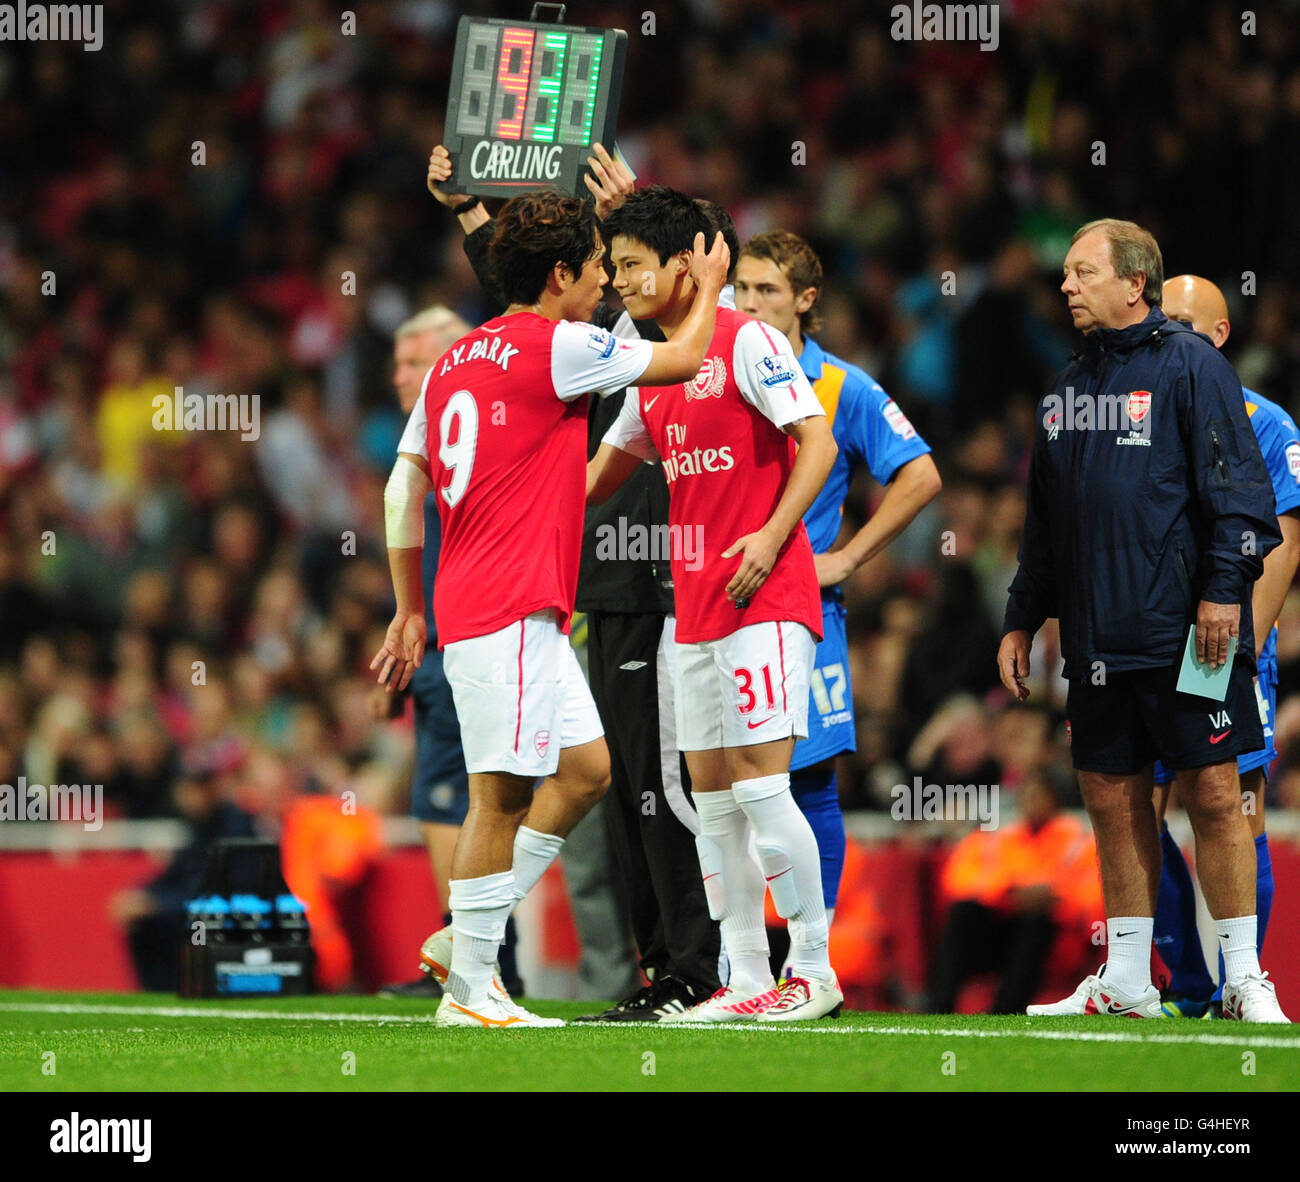 Soccer - Carling Cup - Third Round - Arsenal v Shrewsbury Town - Emirates Stadium. Arsenal's Ryo Miyaichi (right) comes on for team mate Chu Young Park (left) Stock Photo